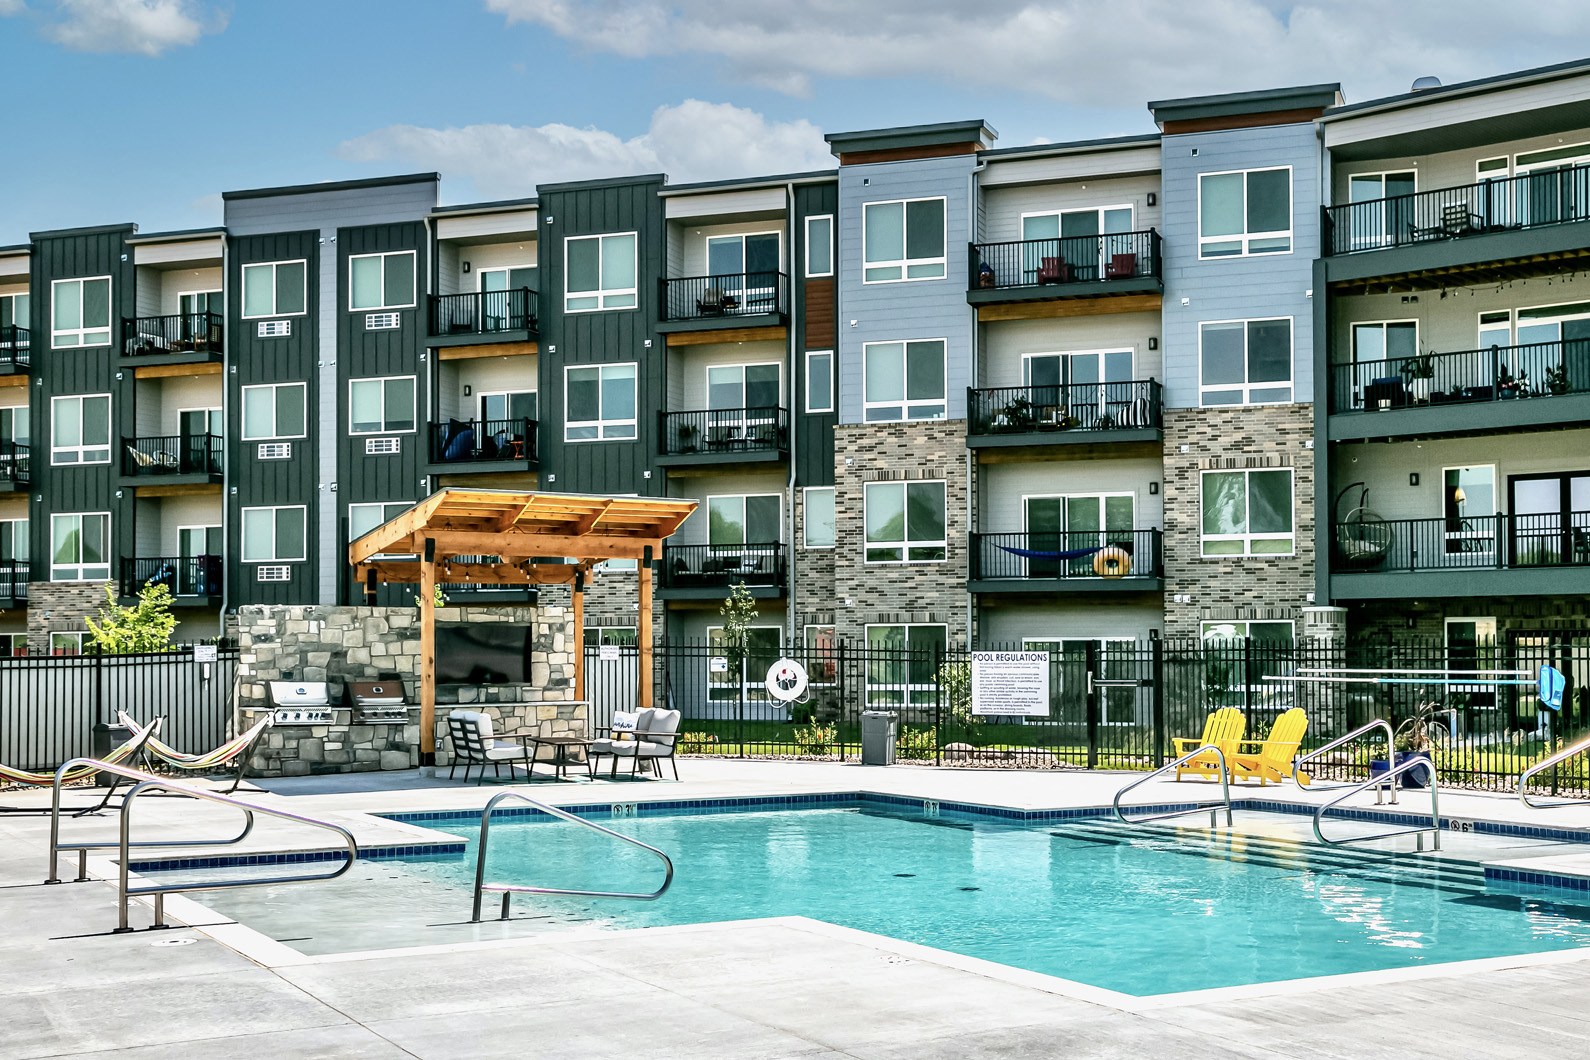 Resort-style pool at AXIS apartments in Papillion, NE